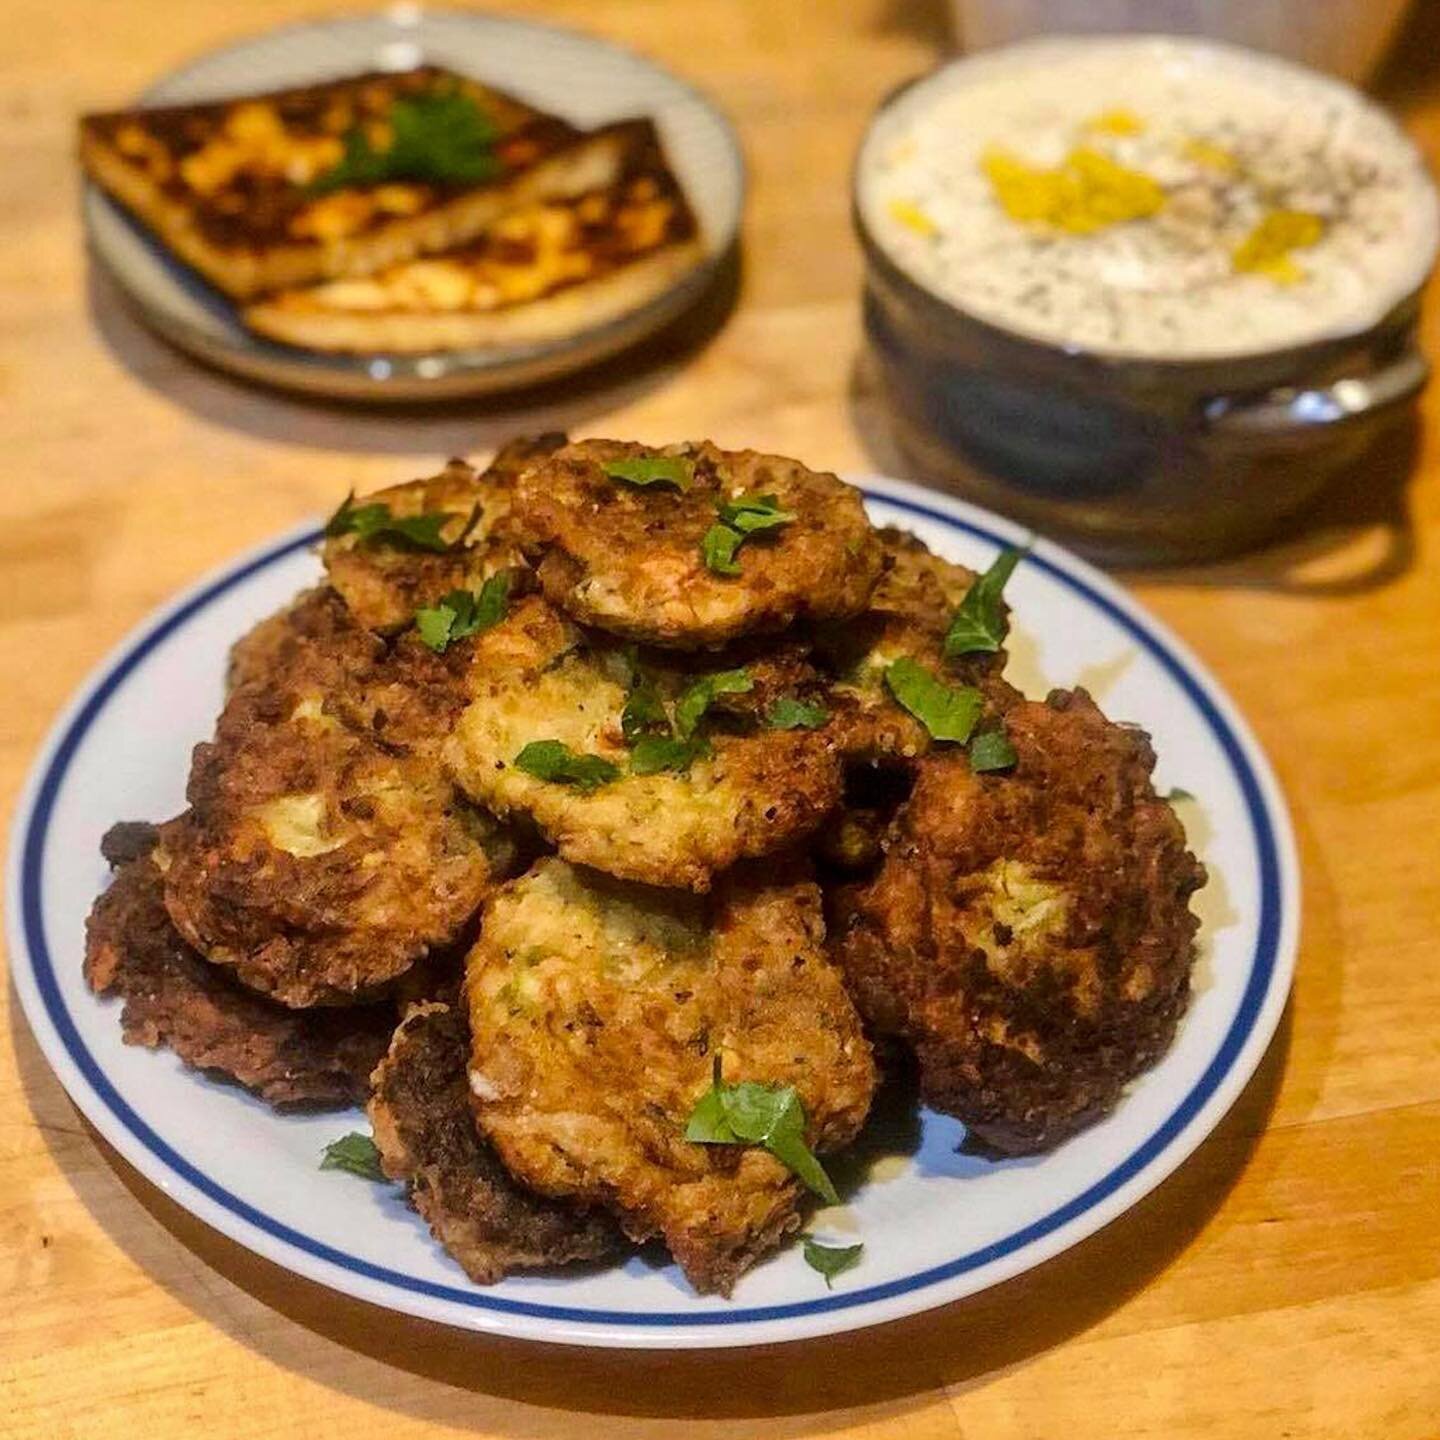 🇬🇷 #stayhome and visit Greece through these zucchini fritters from @triplevir.go: &ldquo;A lot of the food that I would eat back home in Greece, I wouldn&rsquo;t try to make by myself living abroad thinking that I will never do it half as good as m